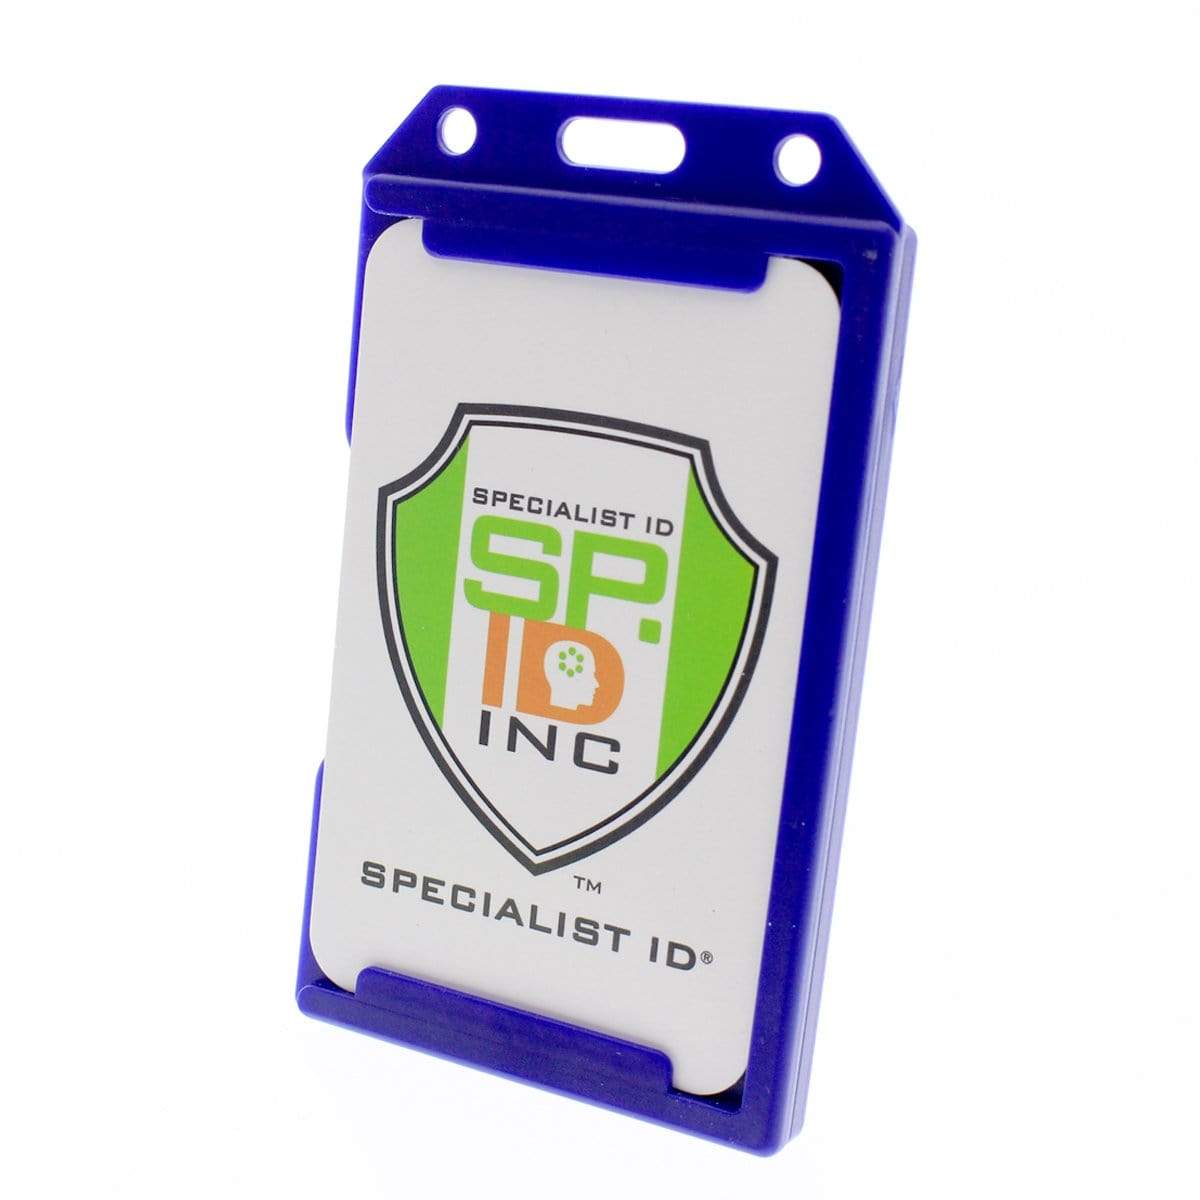 A 2 Sided Rigid Vertical MultiCard Badge Holder - Hard Plastic Multiple ID Card Holder (1840-308X) with a Specialist ID Inc identification card featuring a green and orange shield logo, made from rigid plastic.